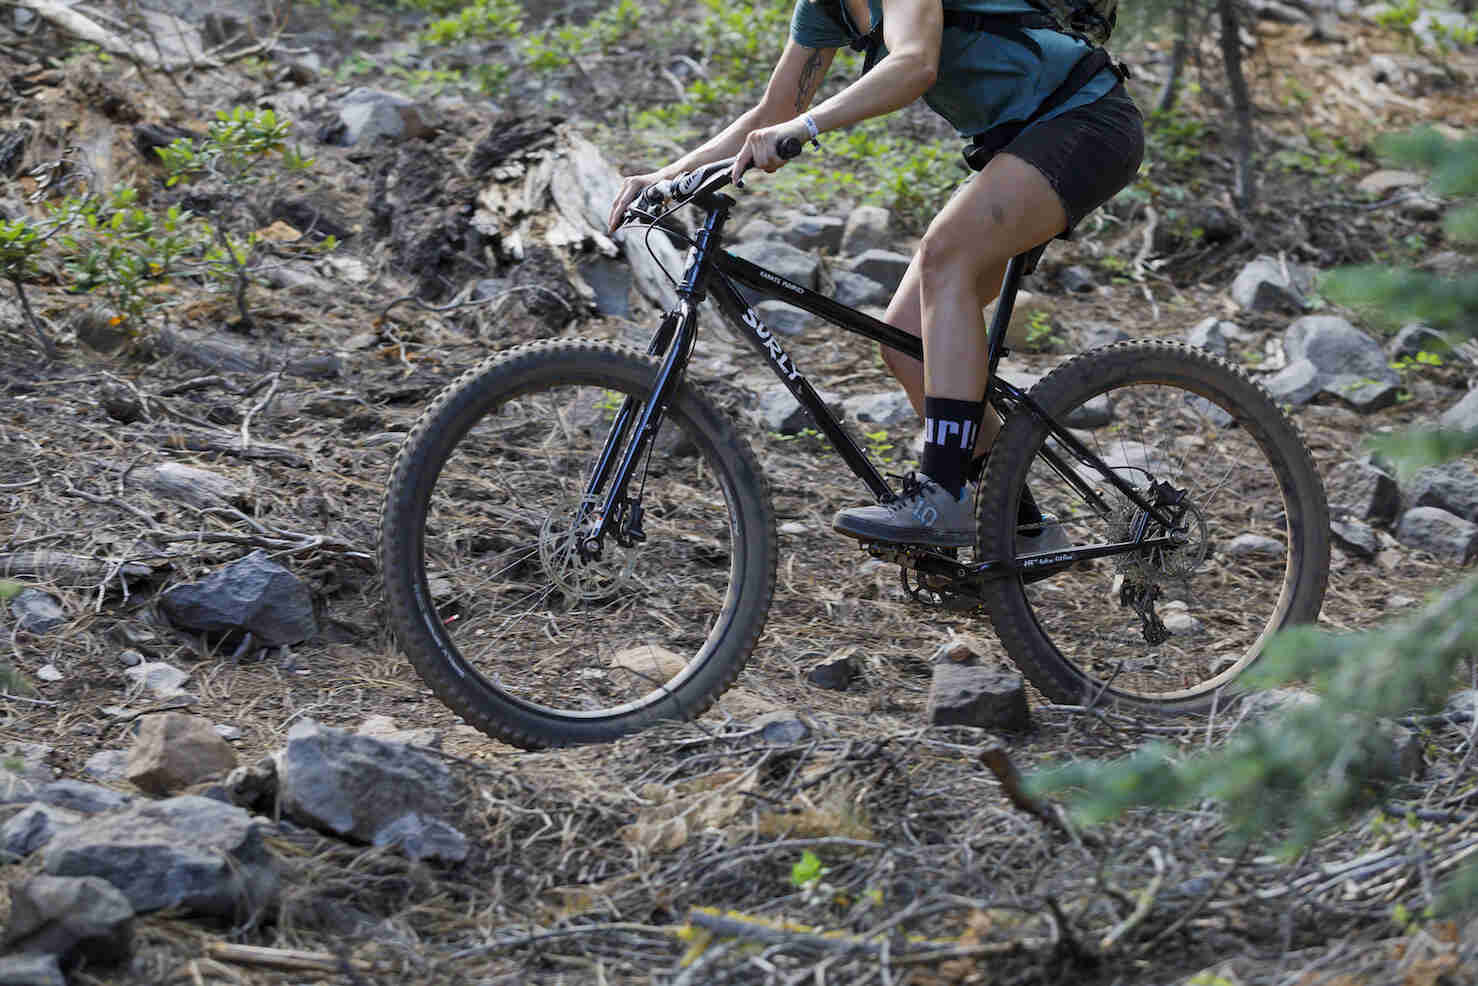 Left side view of a cyclist on a Surly Karate Monkey bike, black, across a rocky hill in the forest